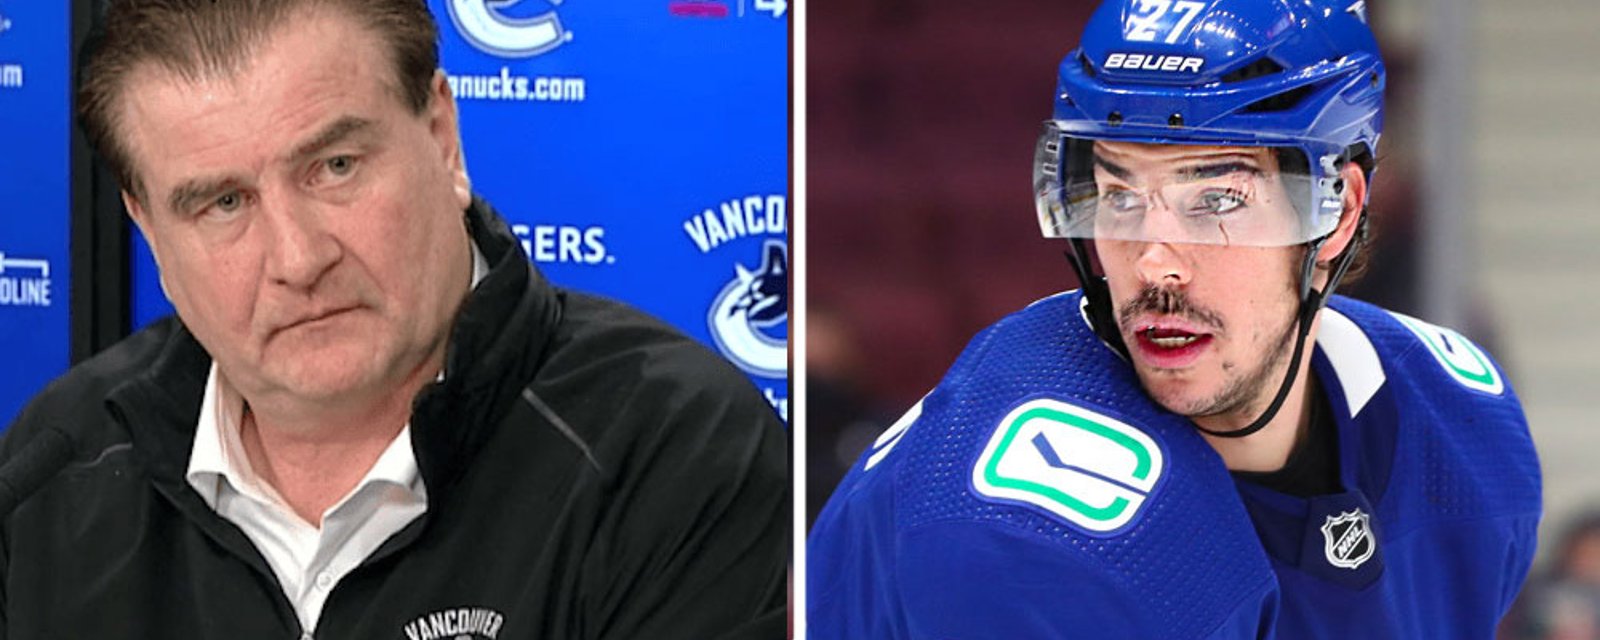 Canucks on Hamonic: “It's bigger than what you think. We're working with him to get him the help he needs.”